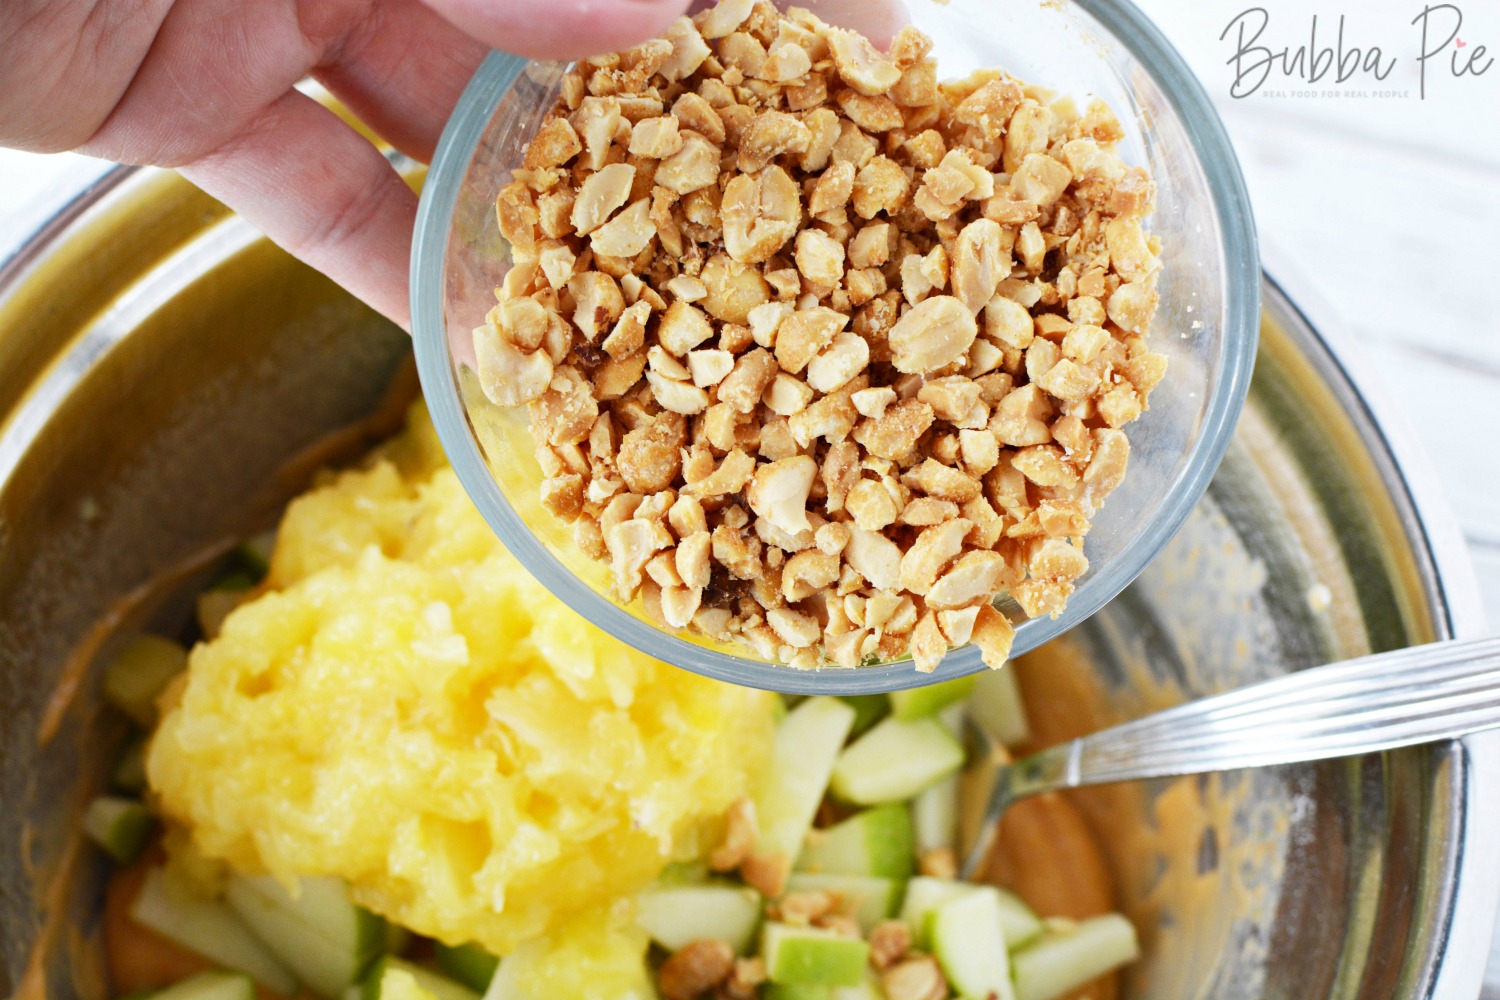 Camping Salads like this caramel apple salad with nuts are great for picnics or potlucks